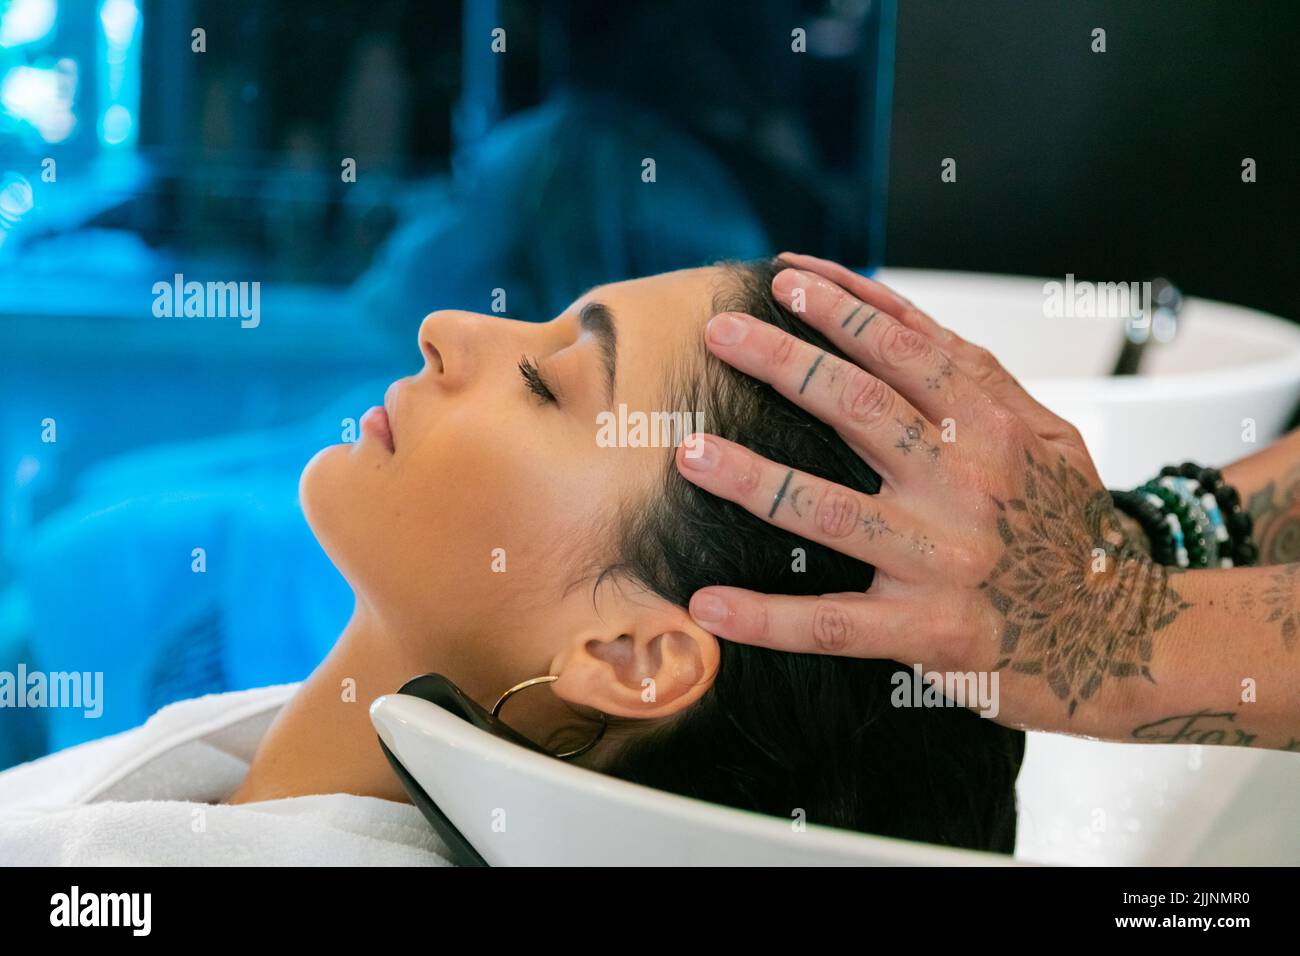 A closeup shot of a female relaxing while her hair is being washed at a salon by a tattooed stylist Stock Photo